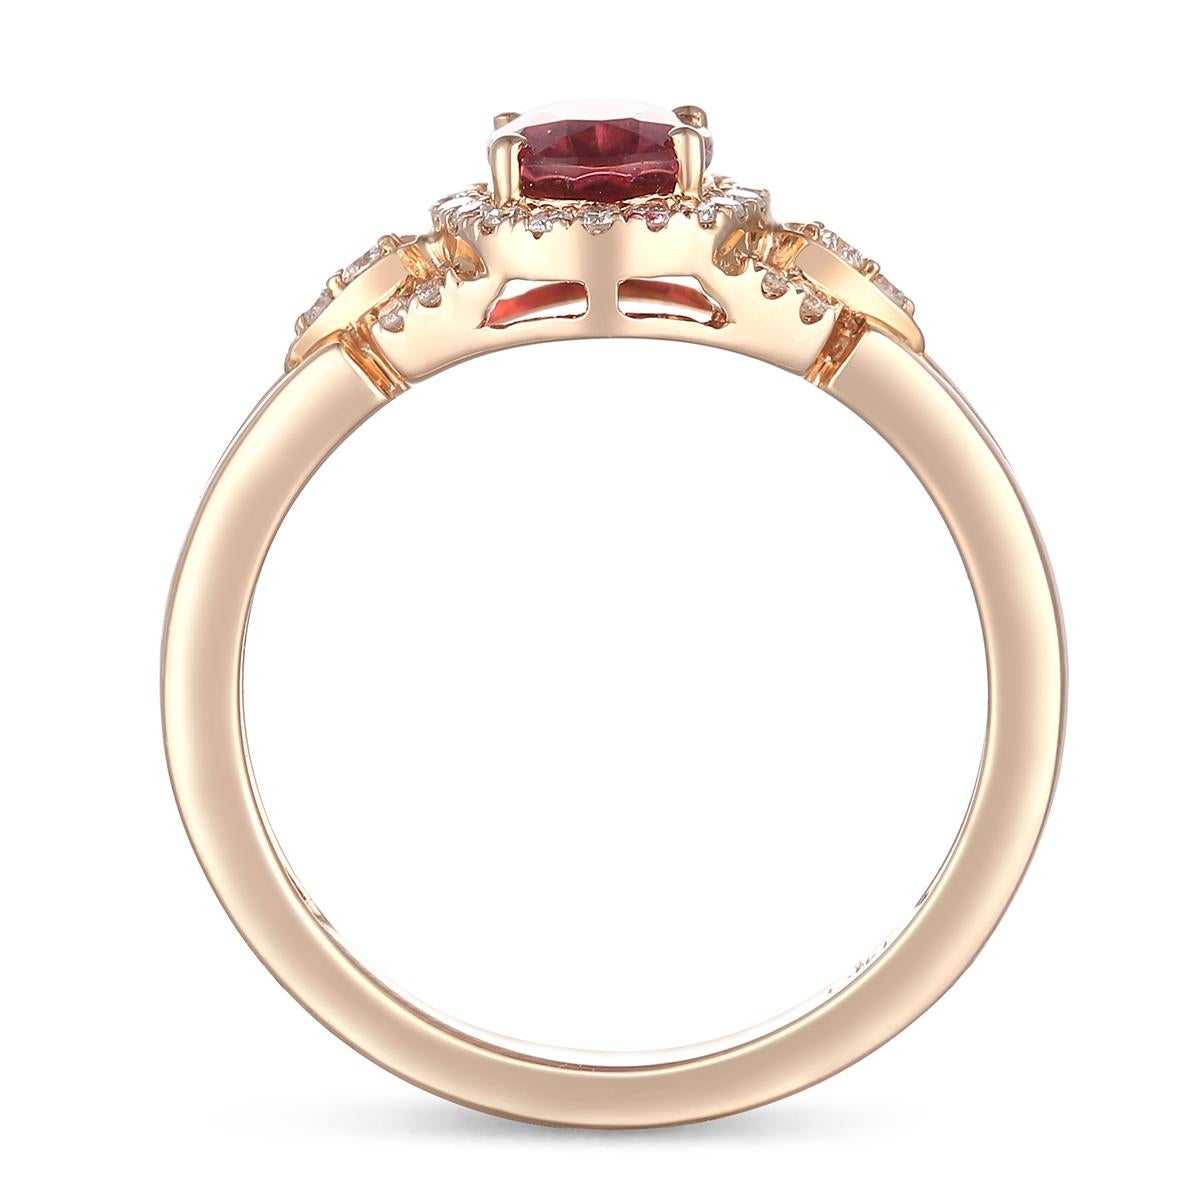 Charming 14 Karat Pink Gold Diamond, And Ruby Ring

Diamonds of approximately 0.17 carats and rubies approximately of 0.85 carats, mounted on 14 karat pink gold ring. The ring weighs approximately 2.93 grams.

Please note: The charges specified do